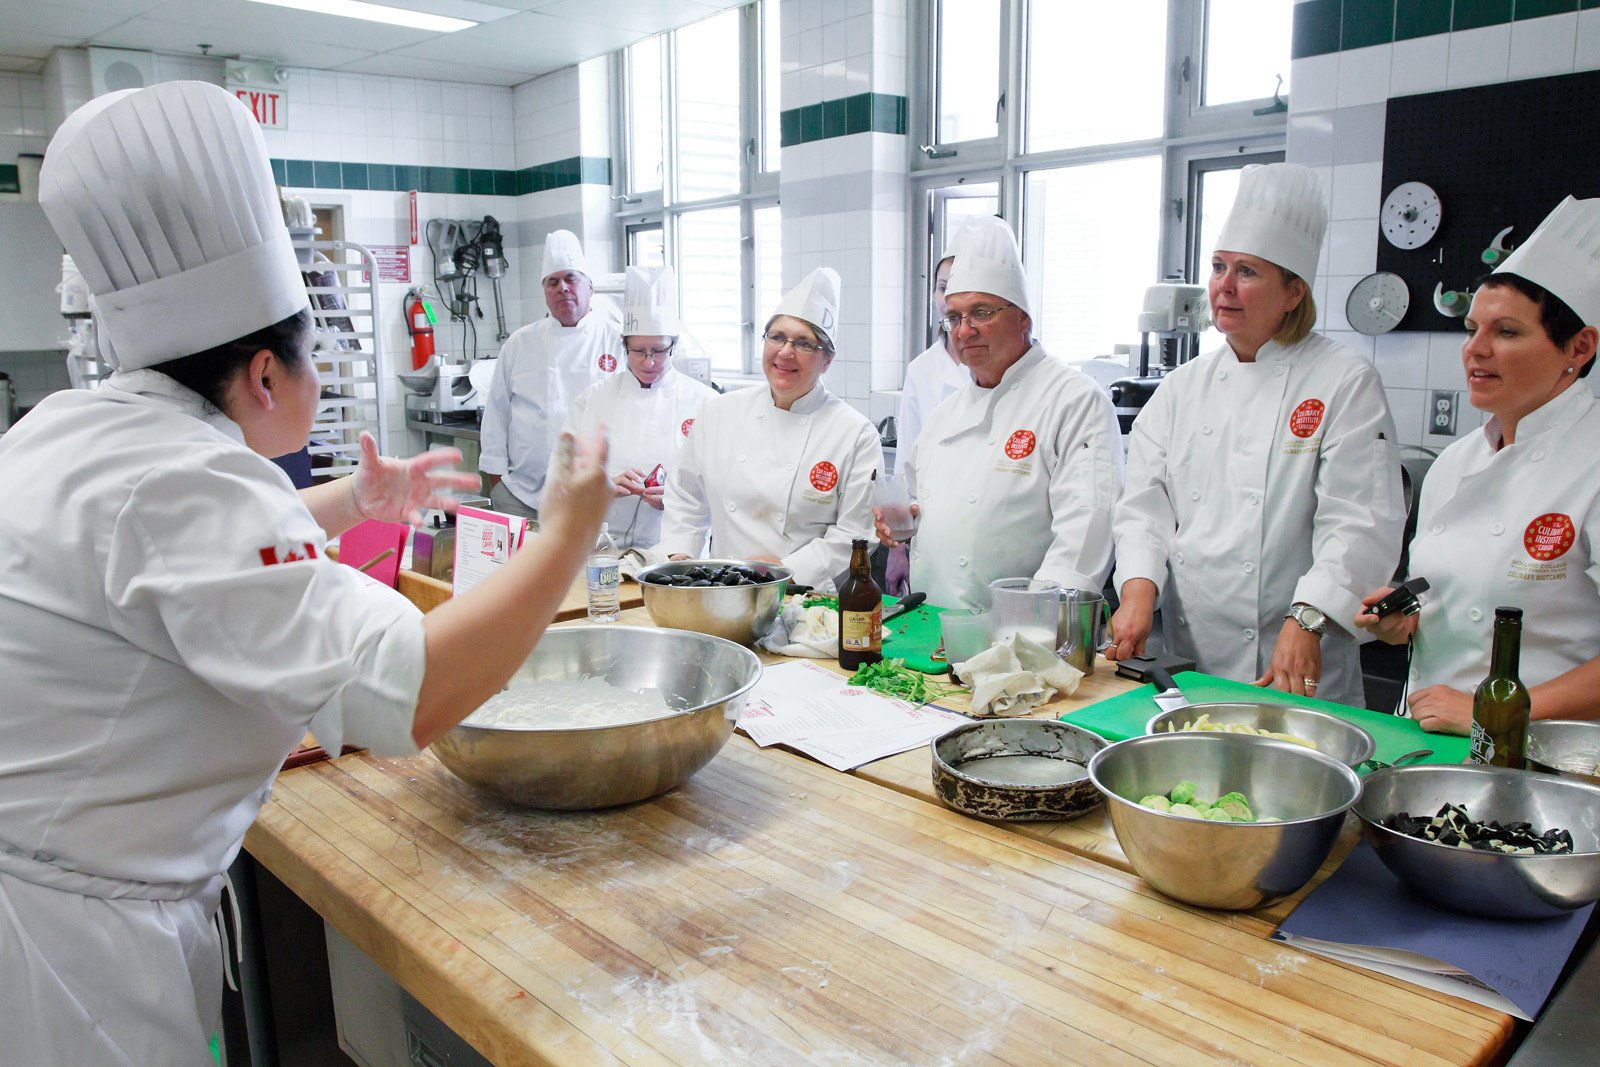 Adults watch Chef instructor at Culinary Bootcamp in kitchen, PEI